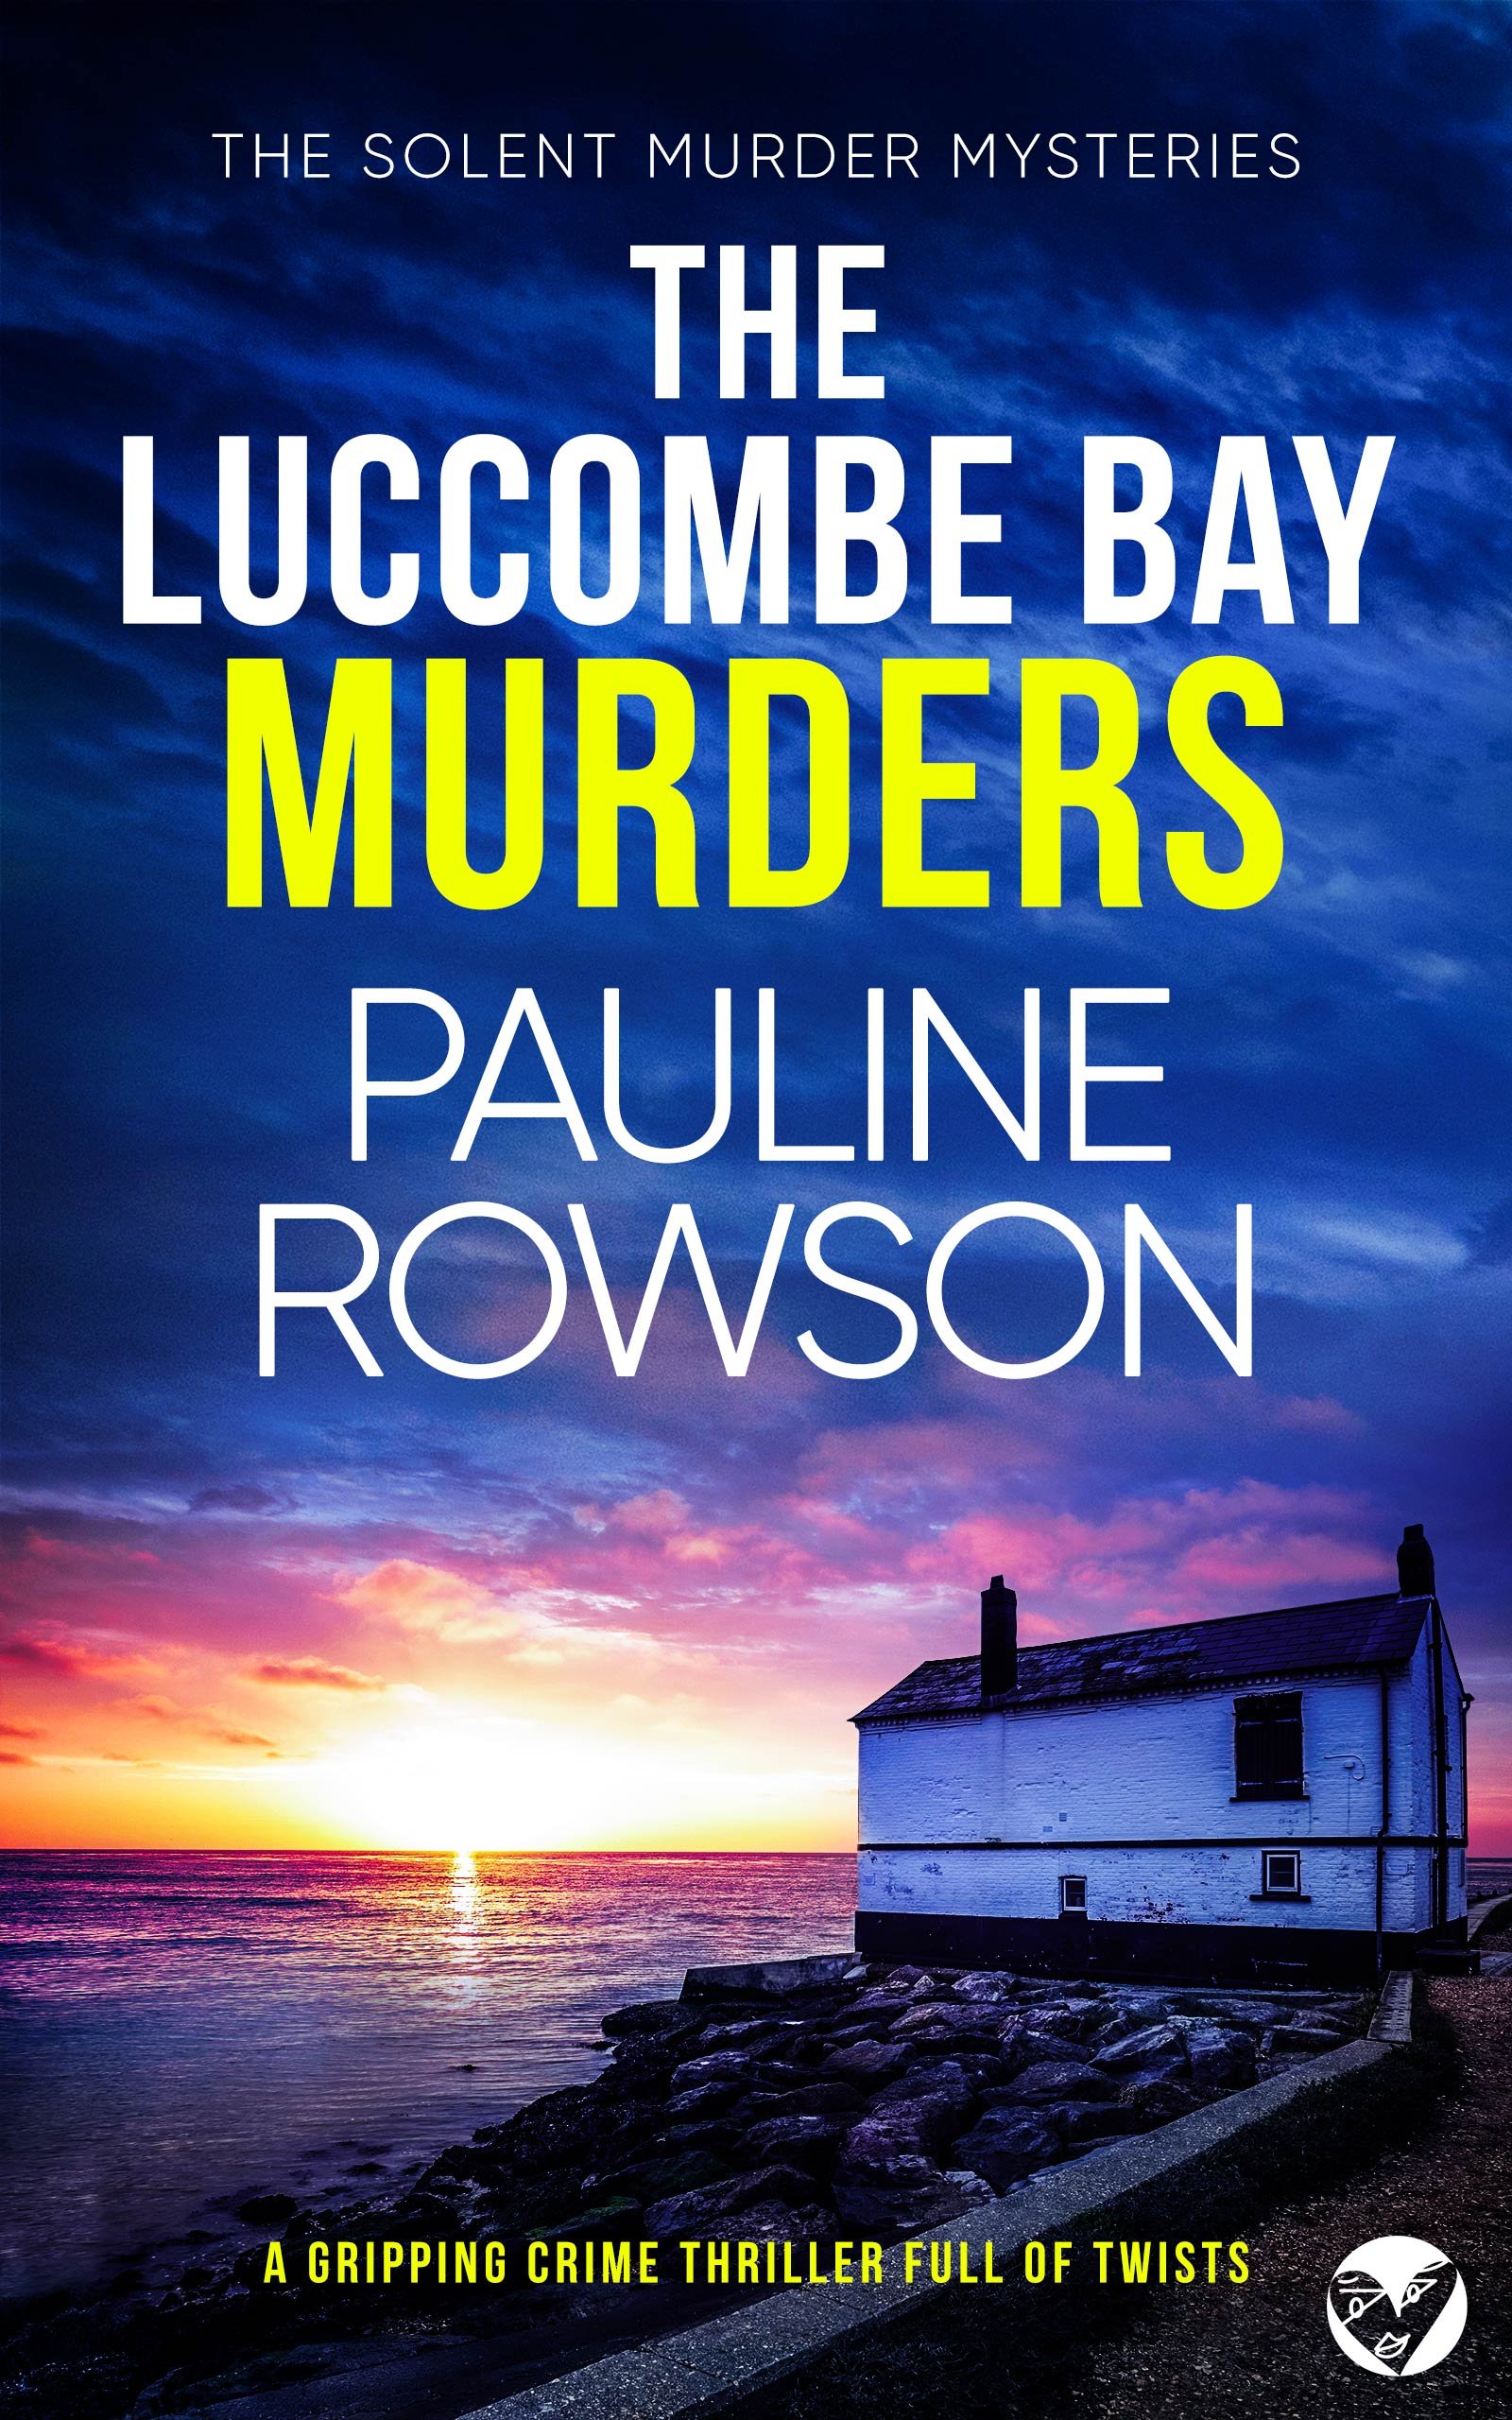 THE LUCCOMBE BAY MURDERS Cover publish 590KB.jpg